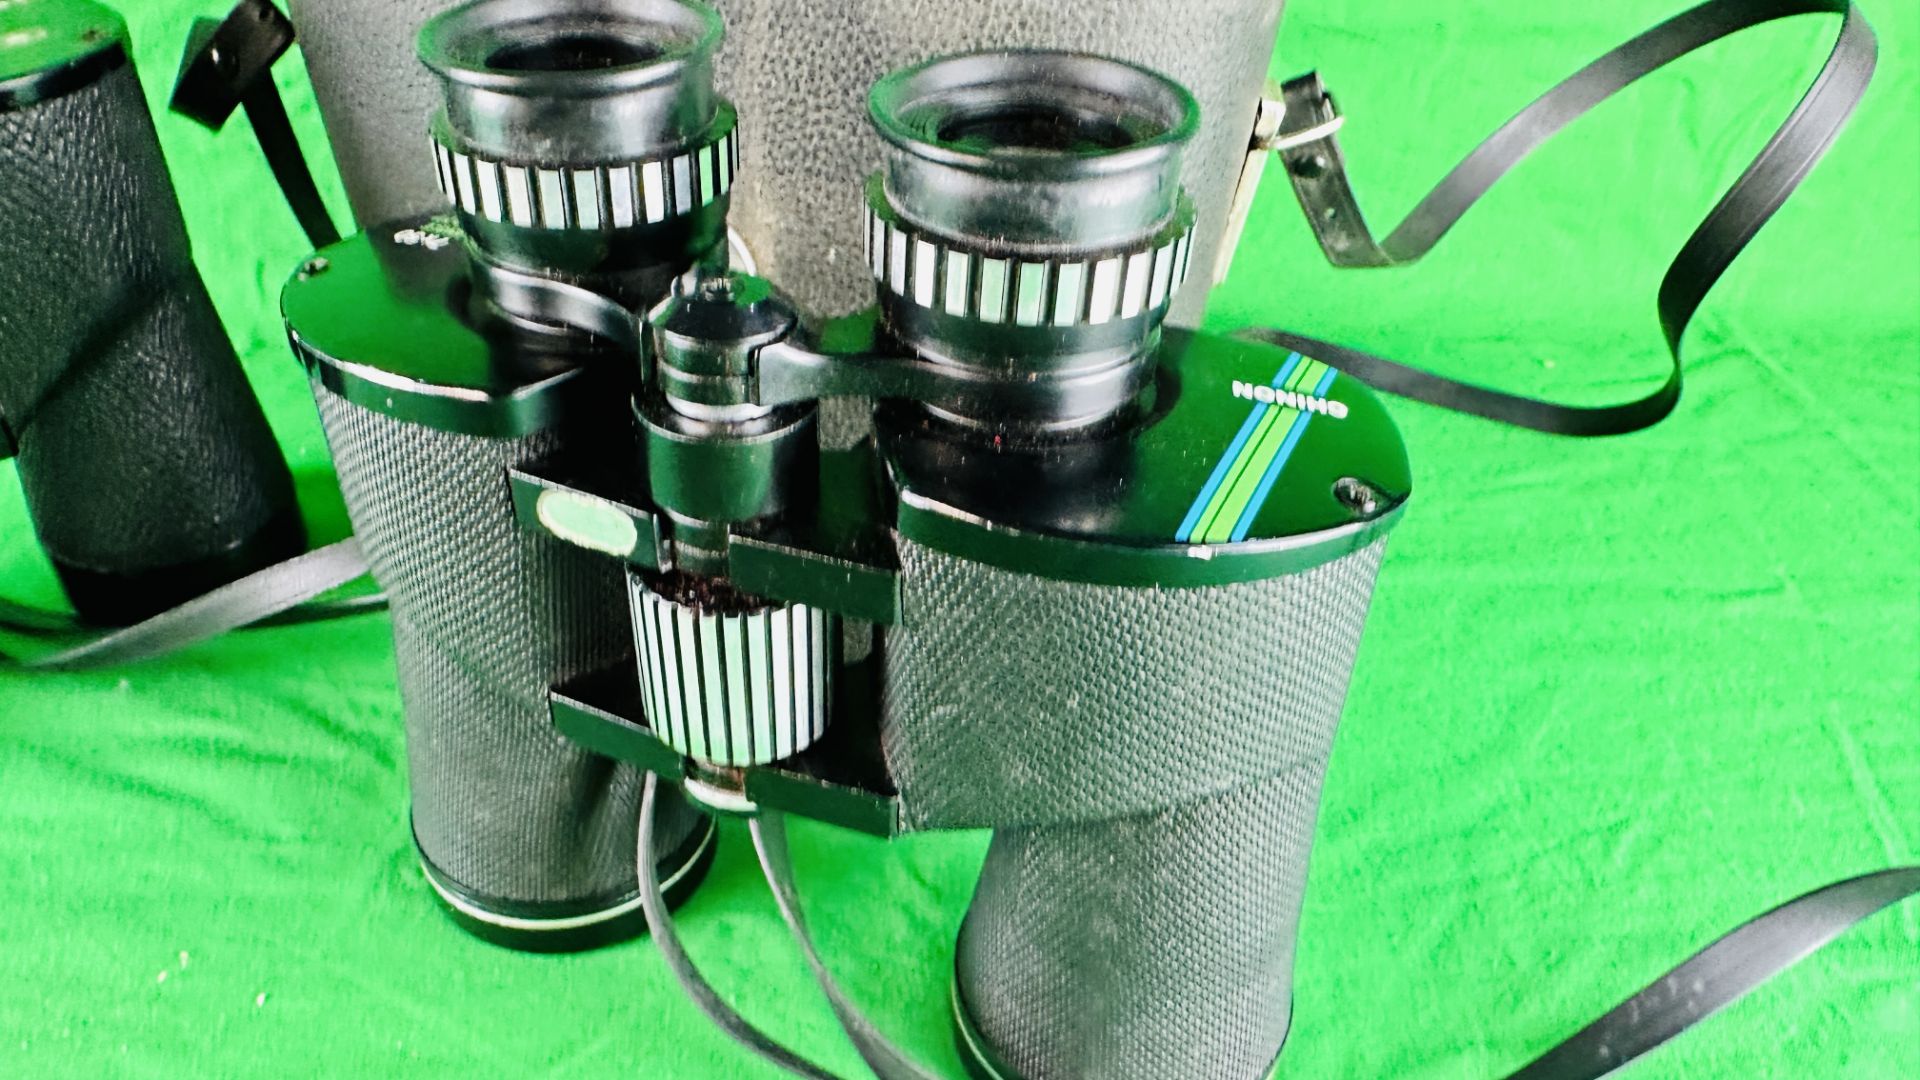 TWO PAIRS OF BINOCULARS INCLUDING CHINON 10X50 FIELD AND CHINON 6X50 - Image 3 of 10